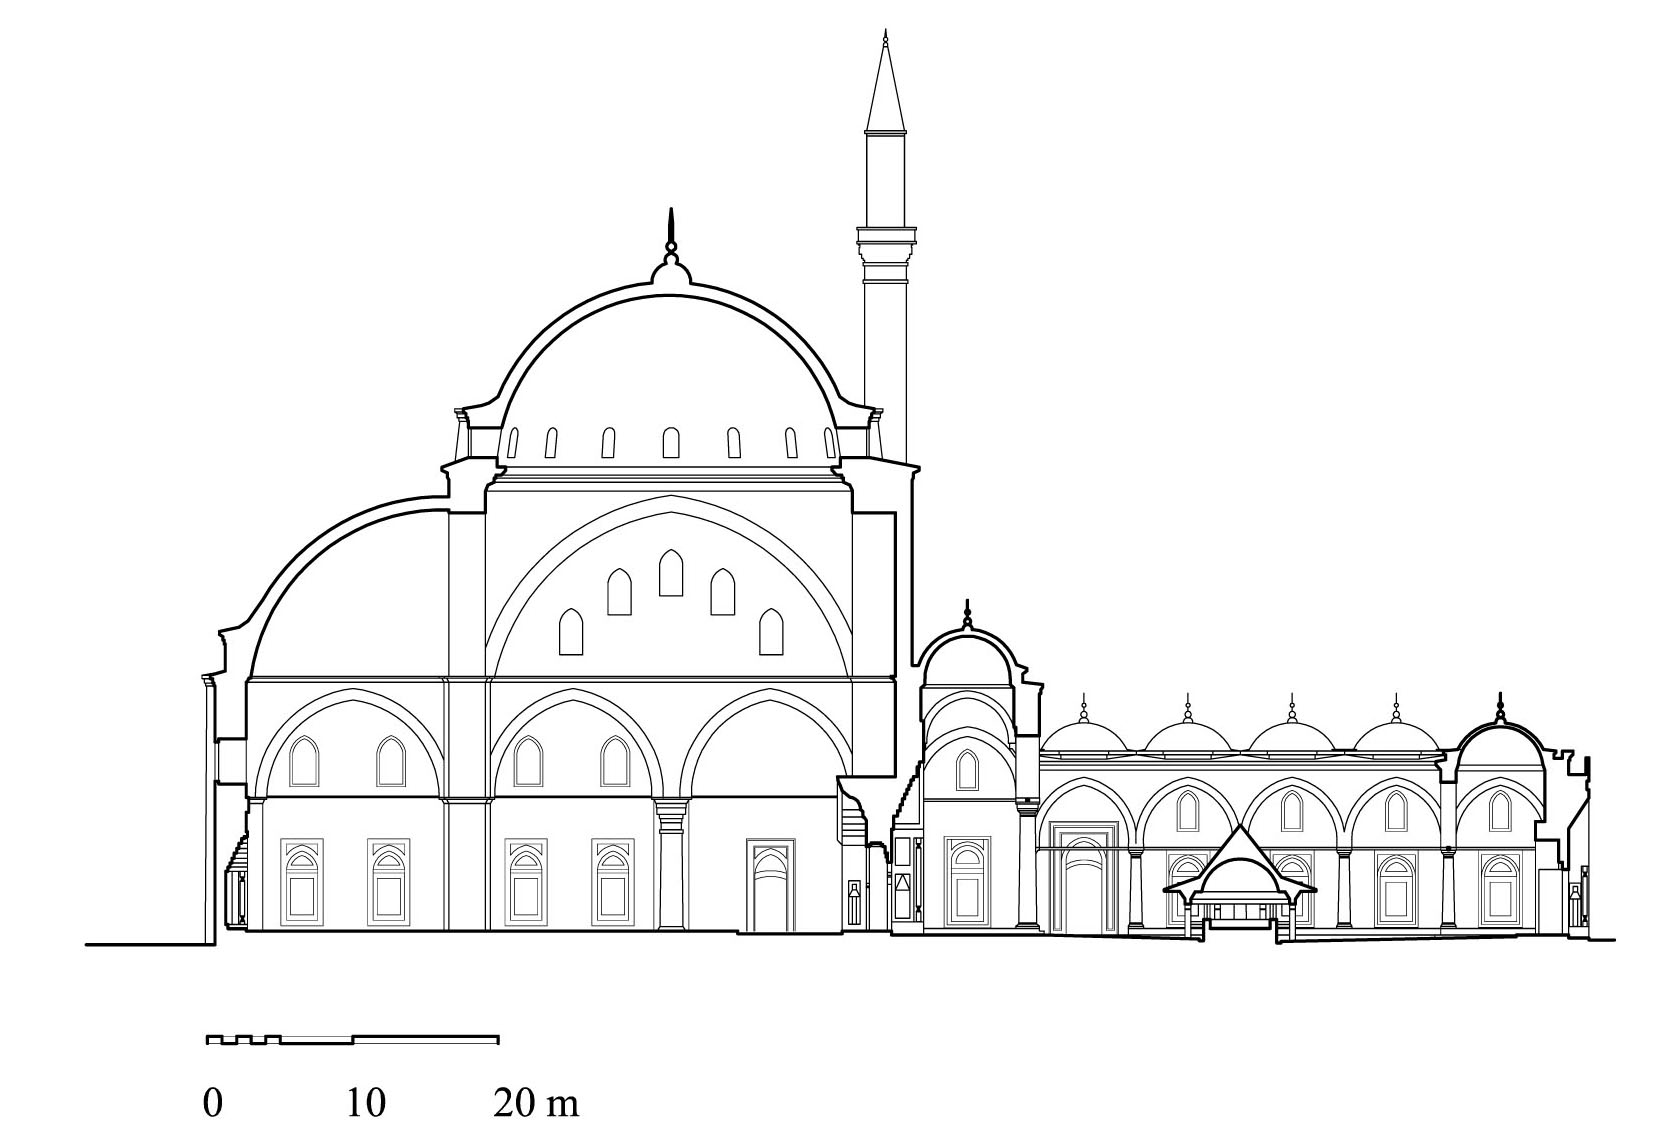 Fatih Camii - Hypothetical cross-section of the original mosque of Mehmed II. DWG file in AutoCAD 2000 format. Click the download button to download a zipped file containing the .dwg file.